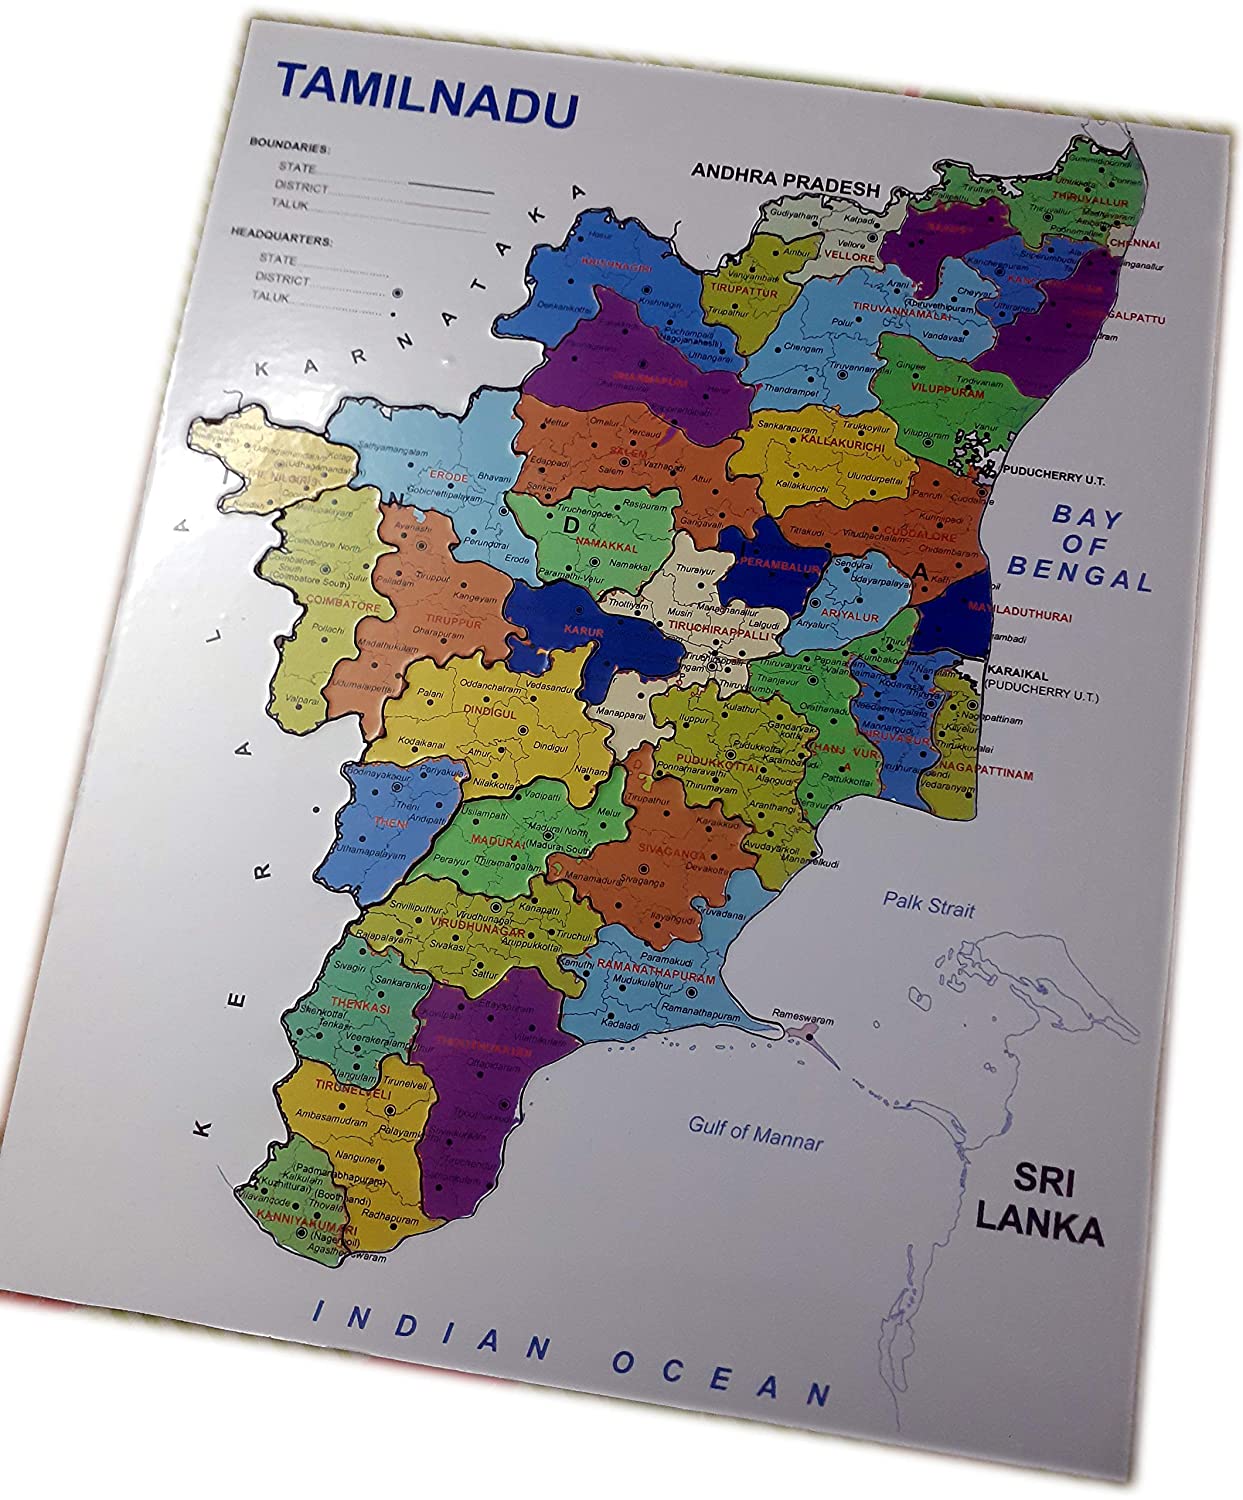 Buy Tamil Nadu State Wooden Puzzle With District Level Details